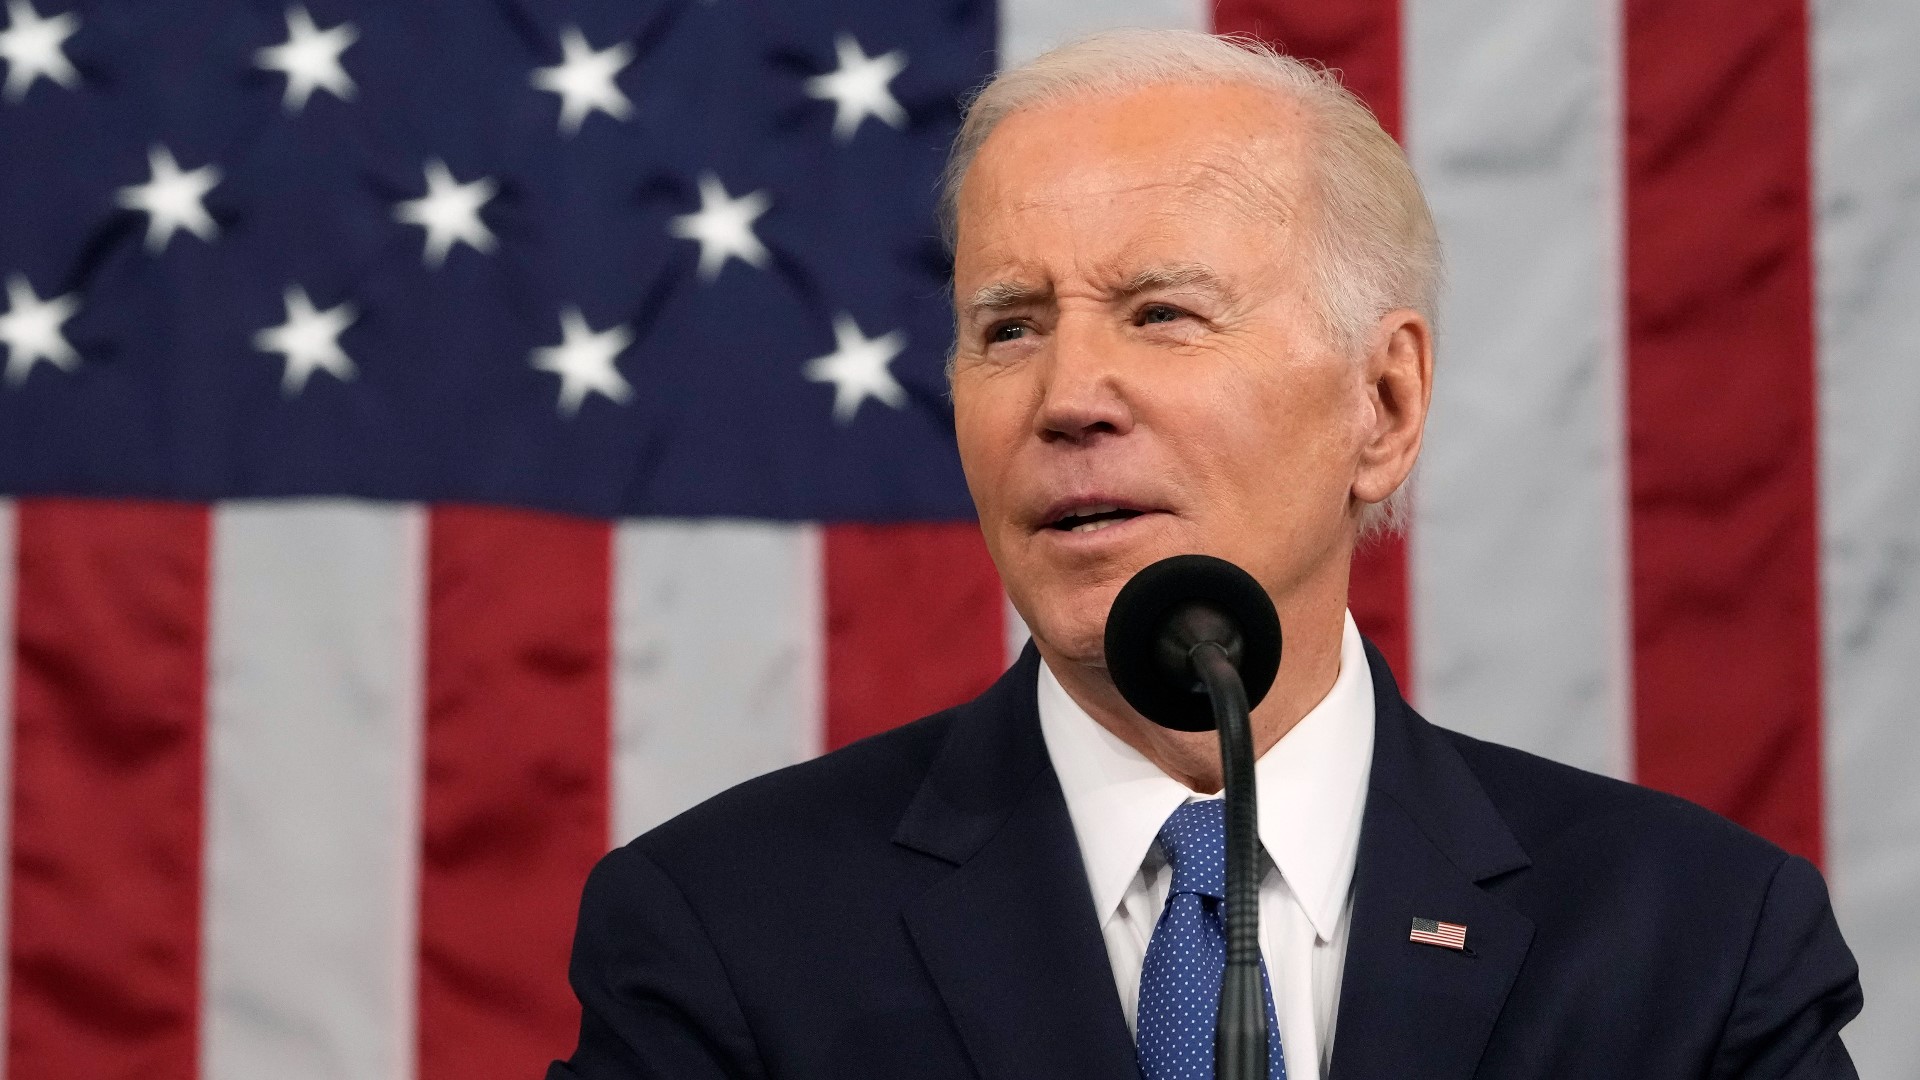 President Joe Biden will give his final State of the Union address before the 2024 election tonight.